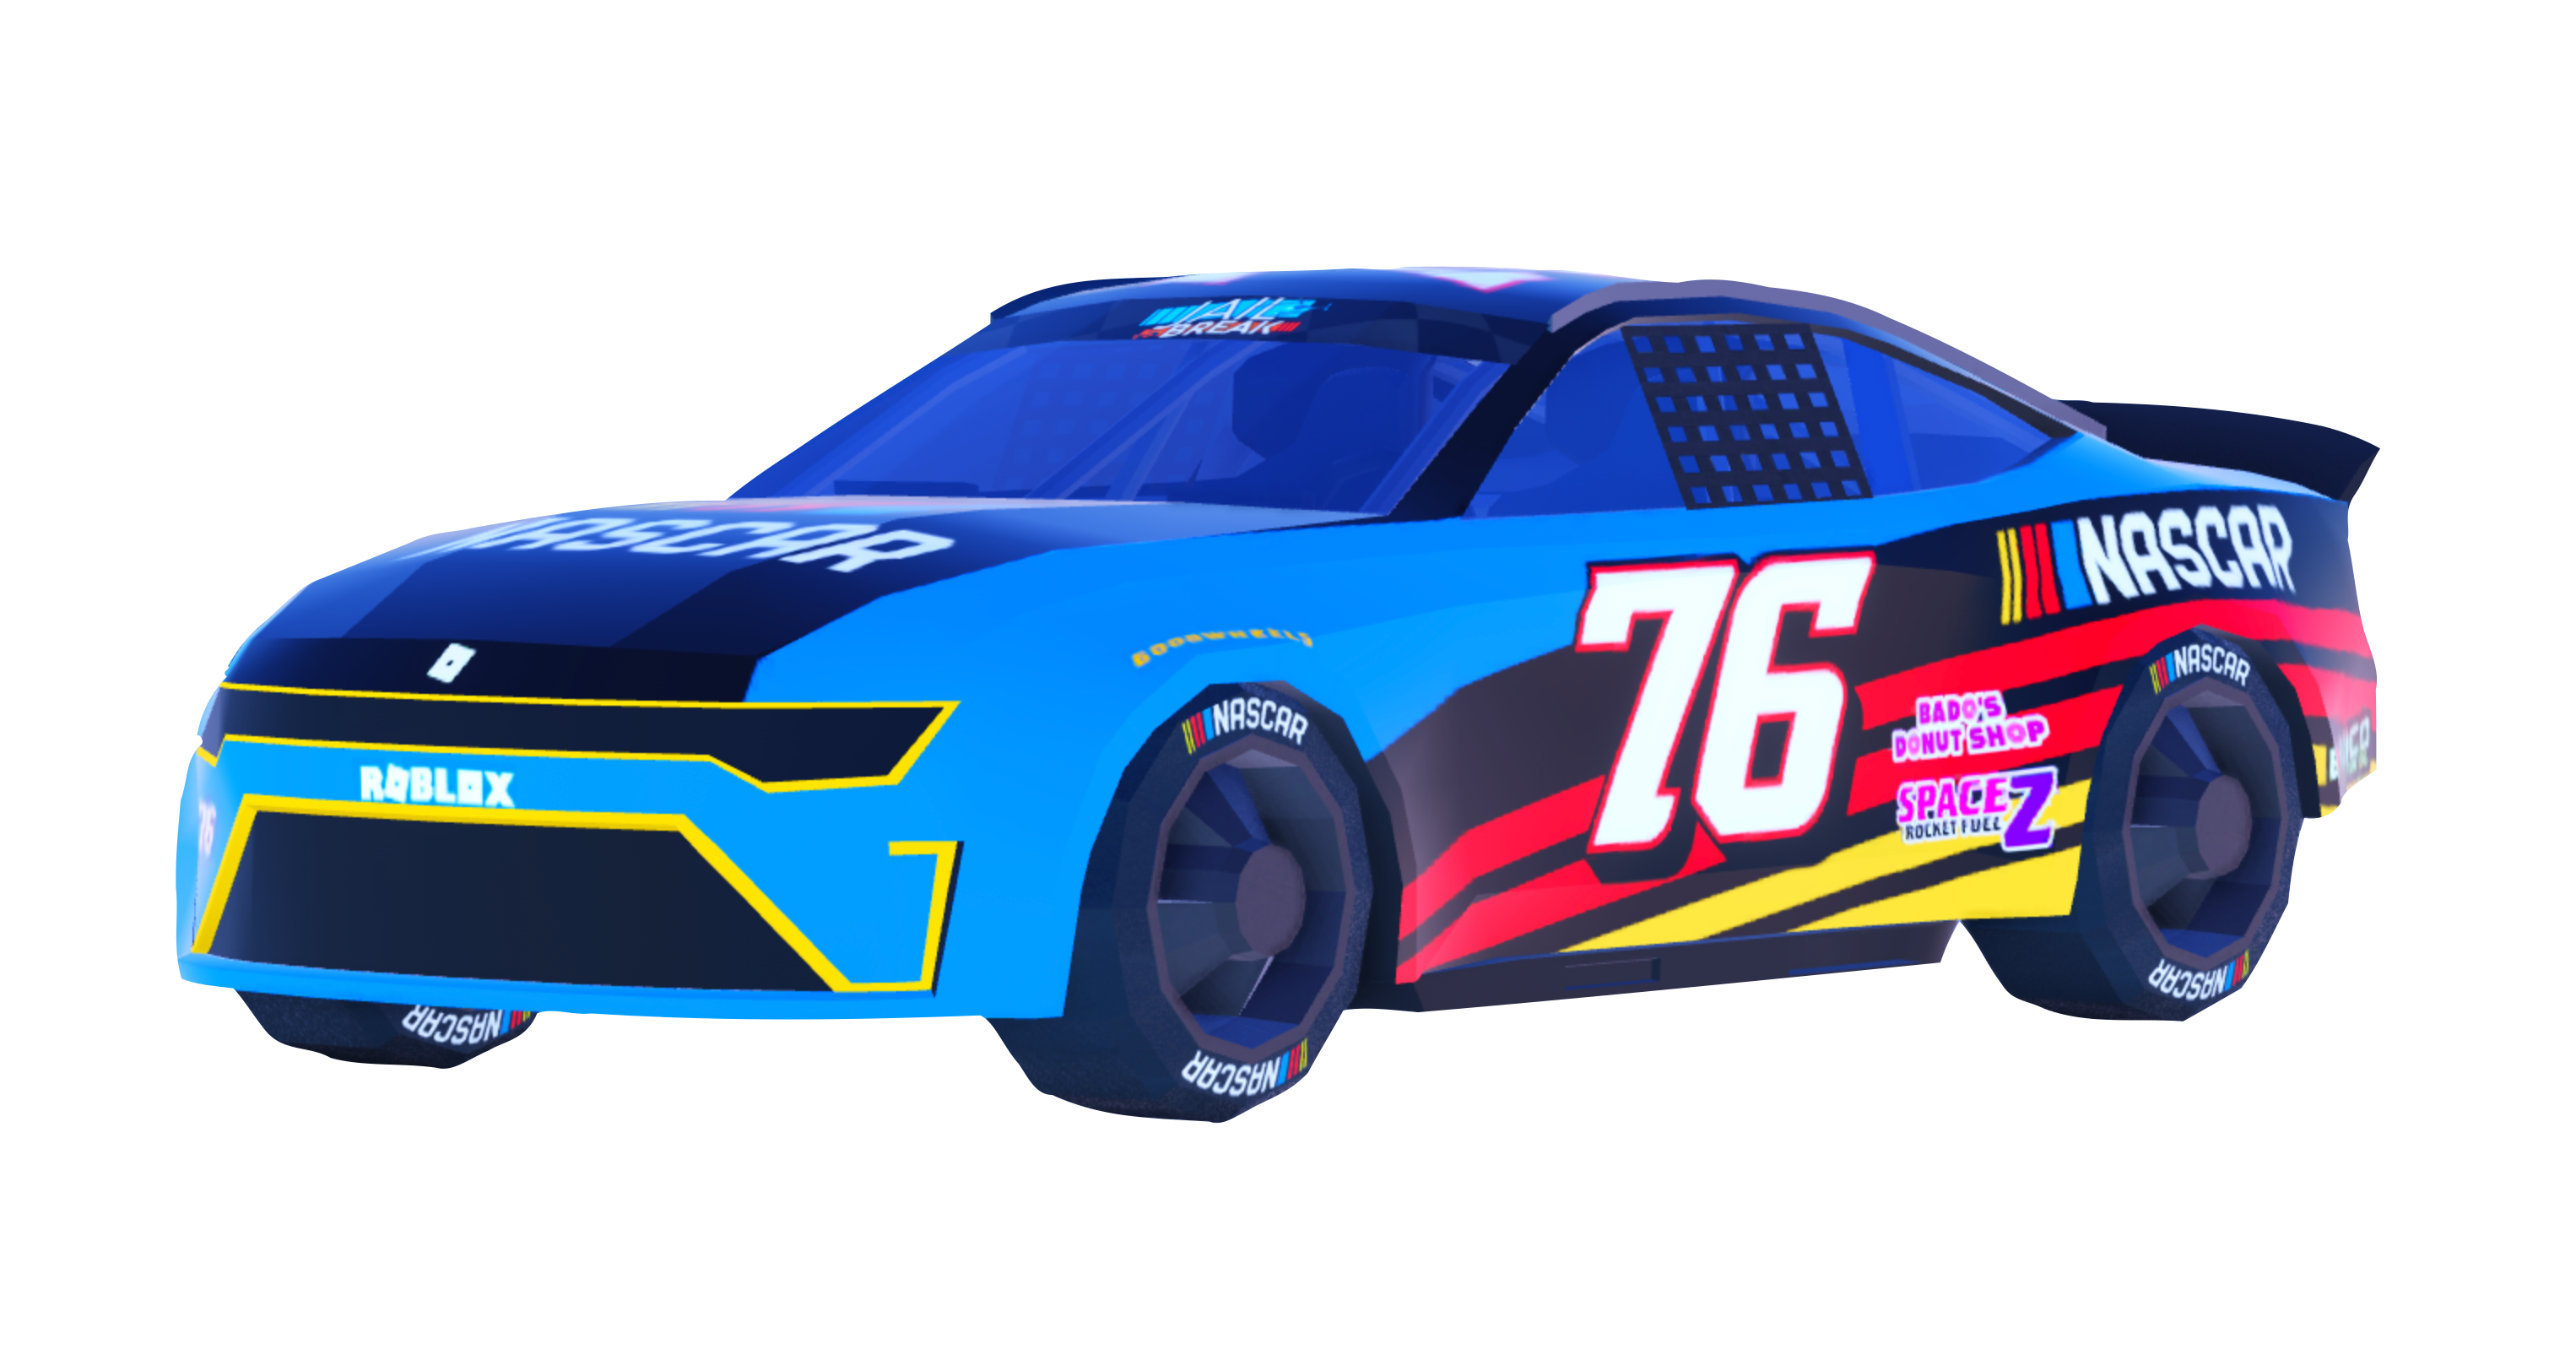 NASCAR launches gaming experience on Roblox